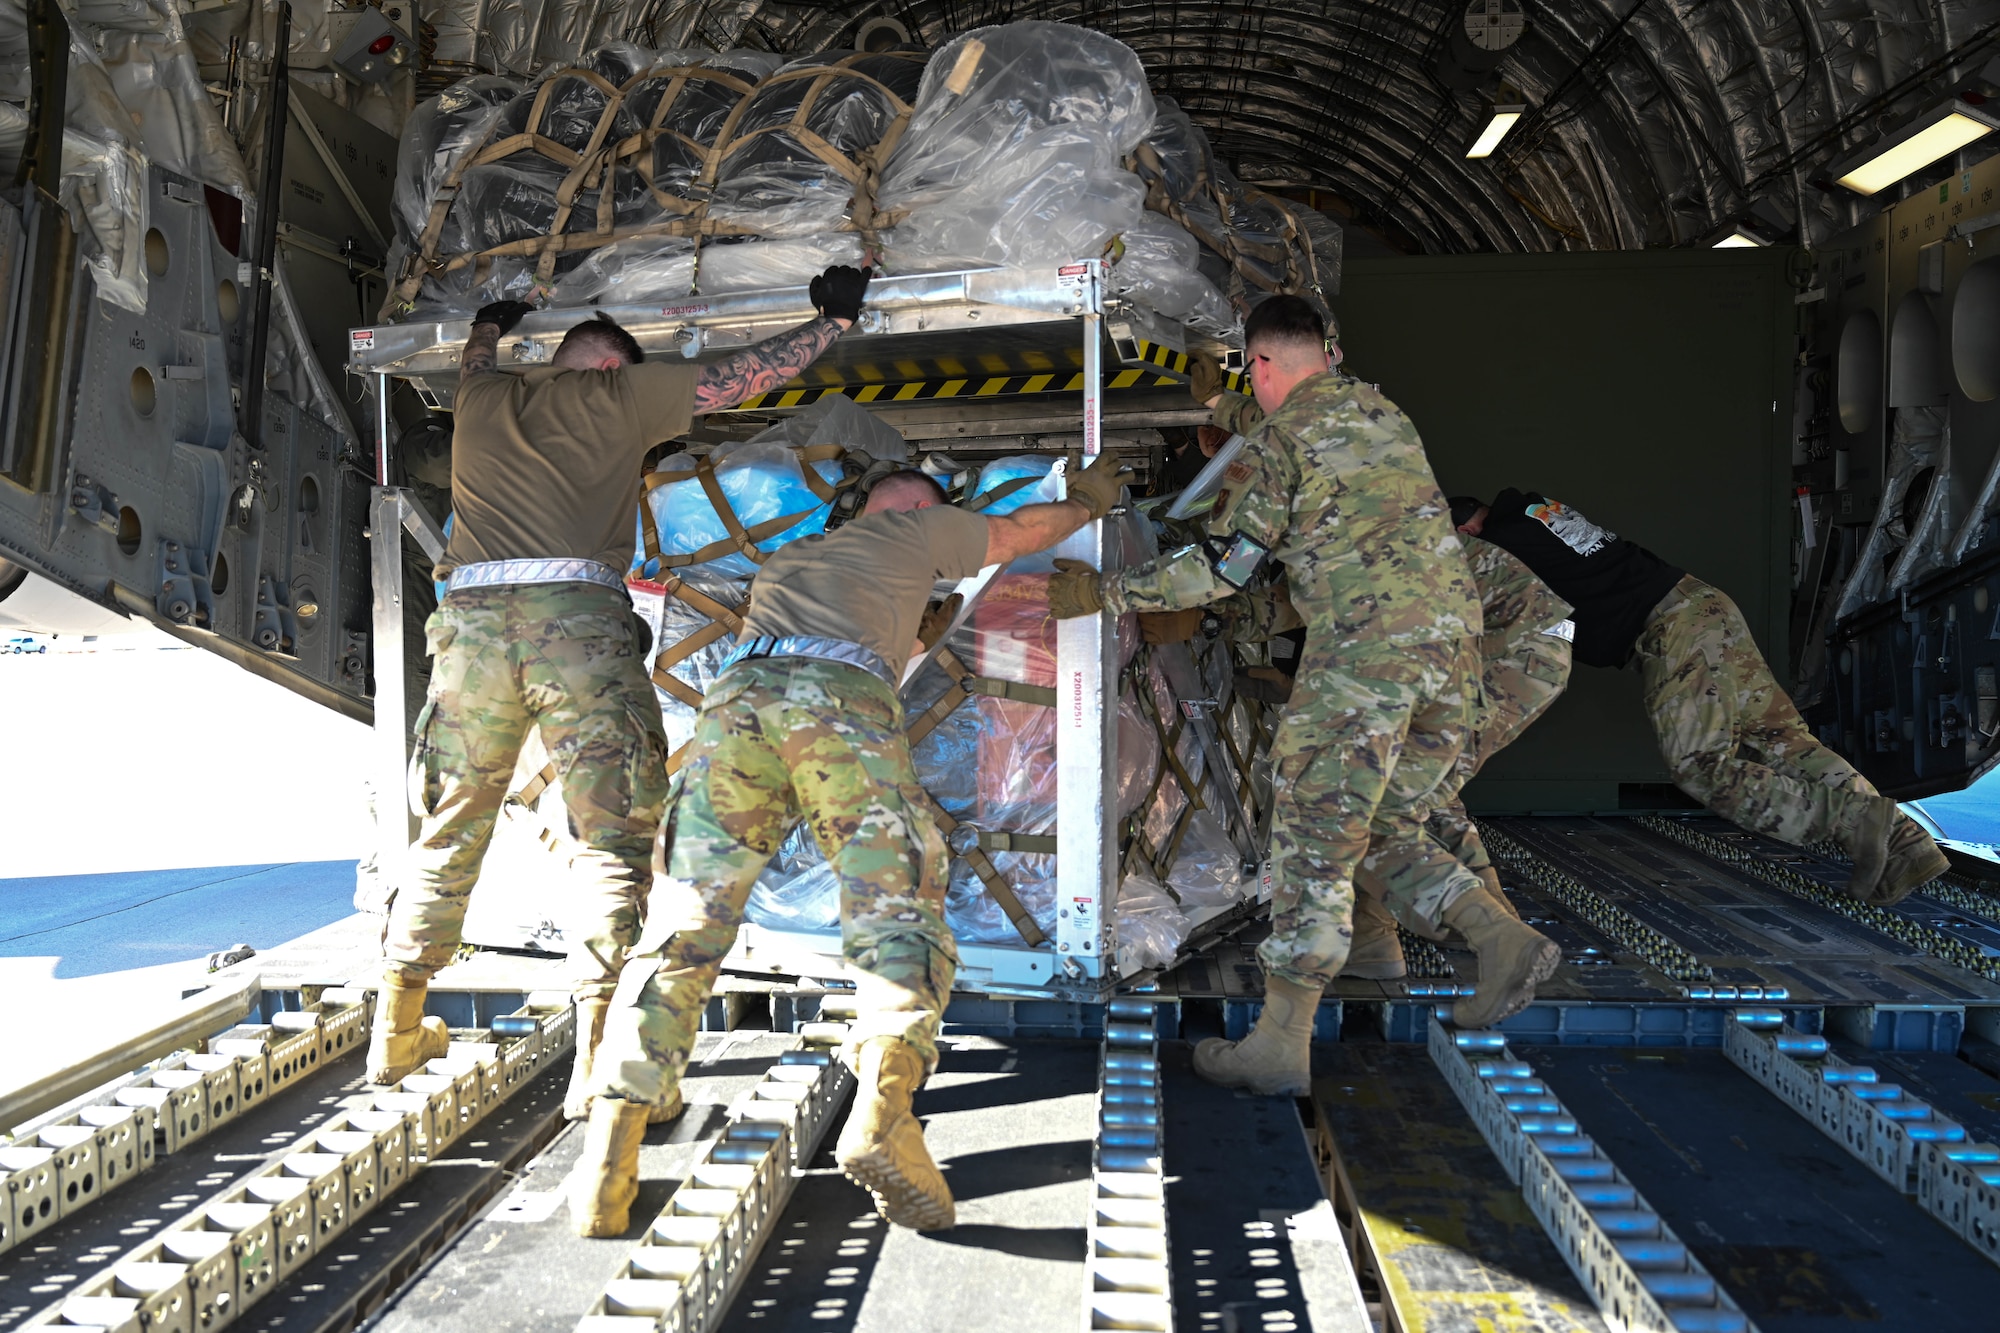 Aircrew members from the 758th Airlift Squadron and ground crew members from the 28th Logistics Readiness Squadron position vertically stacked cargo onto the bay of a C-17 Globemaster III at Ellsworth Air Force Base, South Dakota, Feb. 19, 2024. In support of operational readiness, the 28th LRS coordinated with the 758th Airlift Squadron from Scott Air Force Base, Illinois to implement and execute vertical pallet stacking in order to maximize cargo space. (U.S. Air Force photo by Airman 1st Class Dylan Maher)